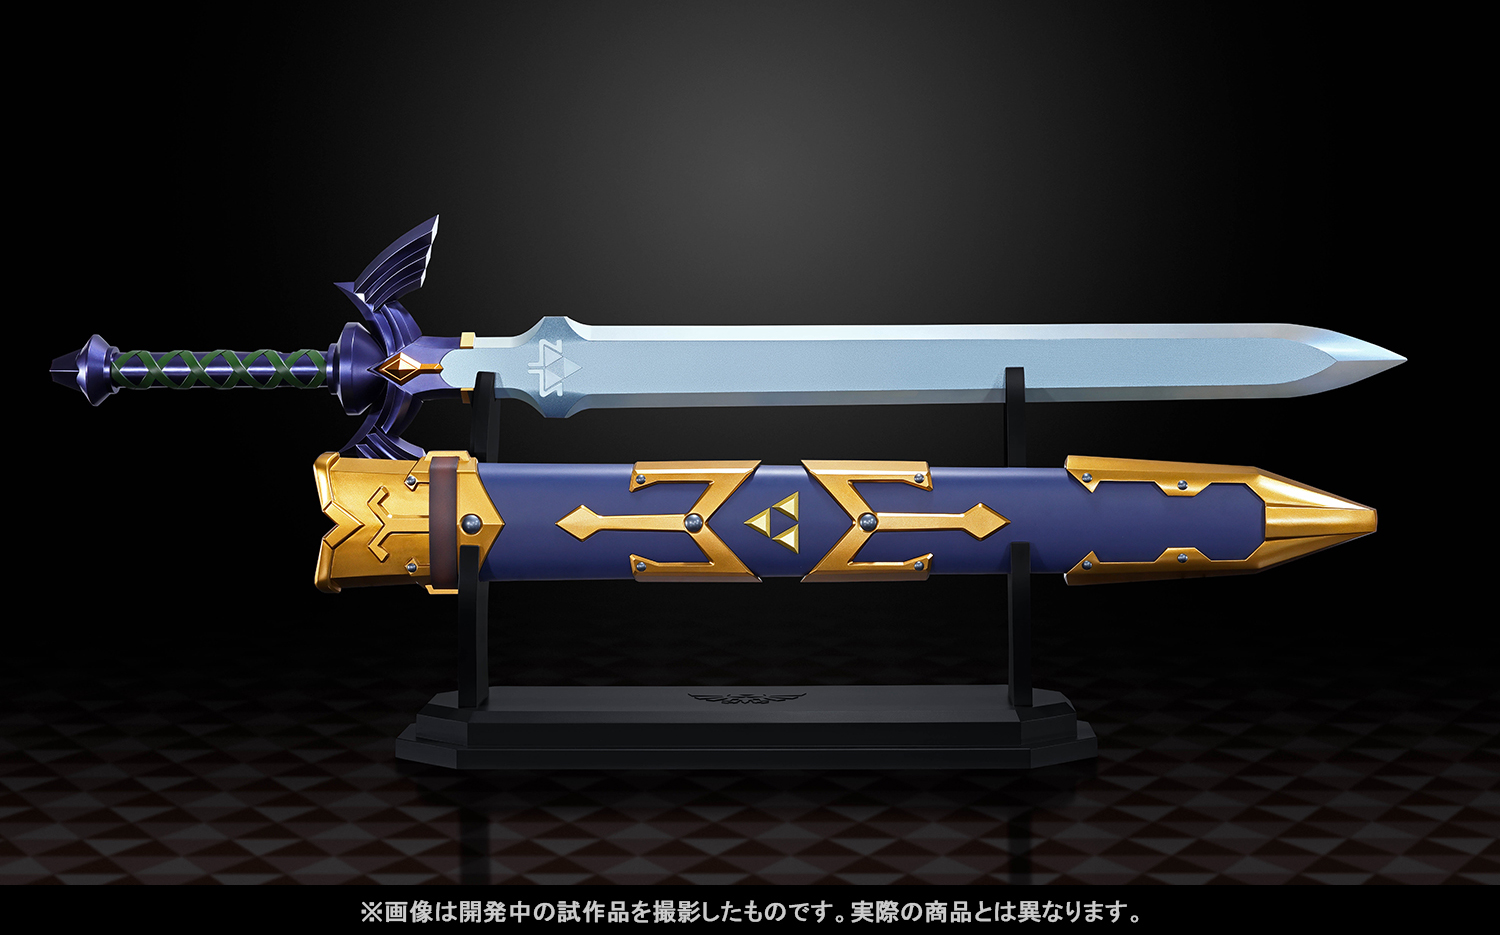 Pre-orders begin on May 10th for the &quot;PROPLICA THE LEGEND OF ZELDA MASTER SWORD&quot; prototype